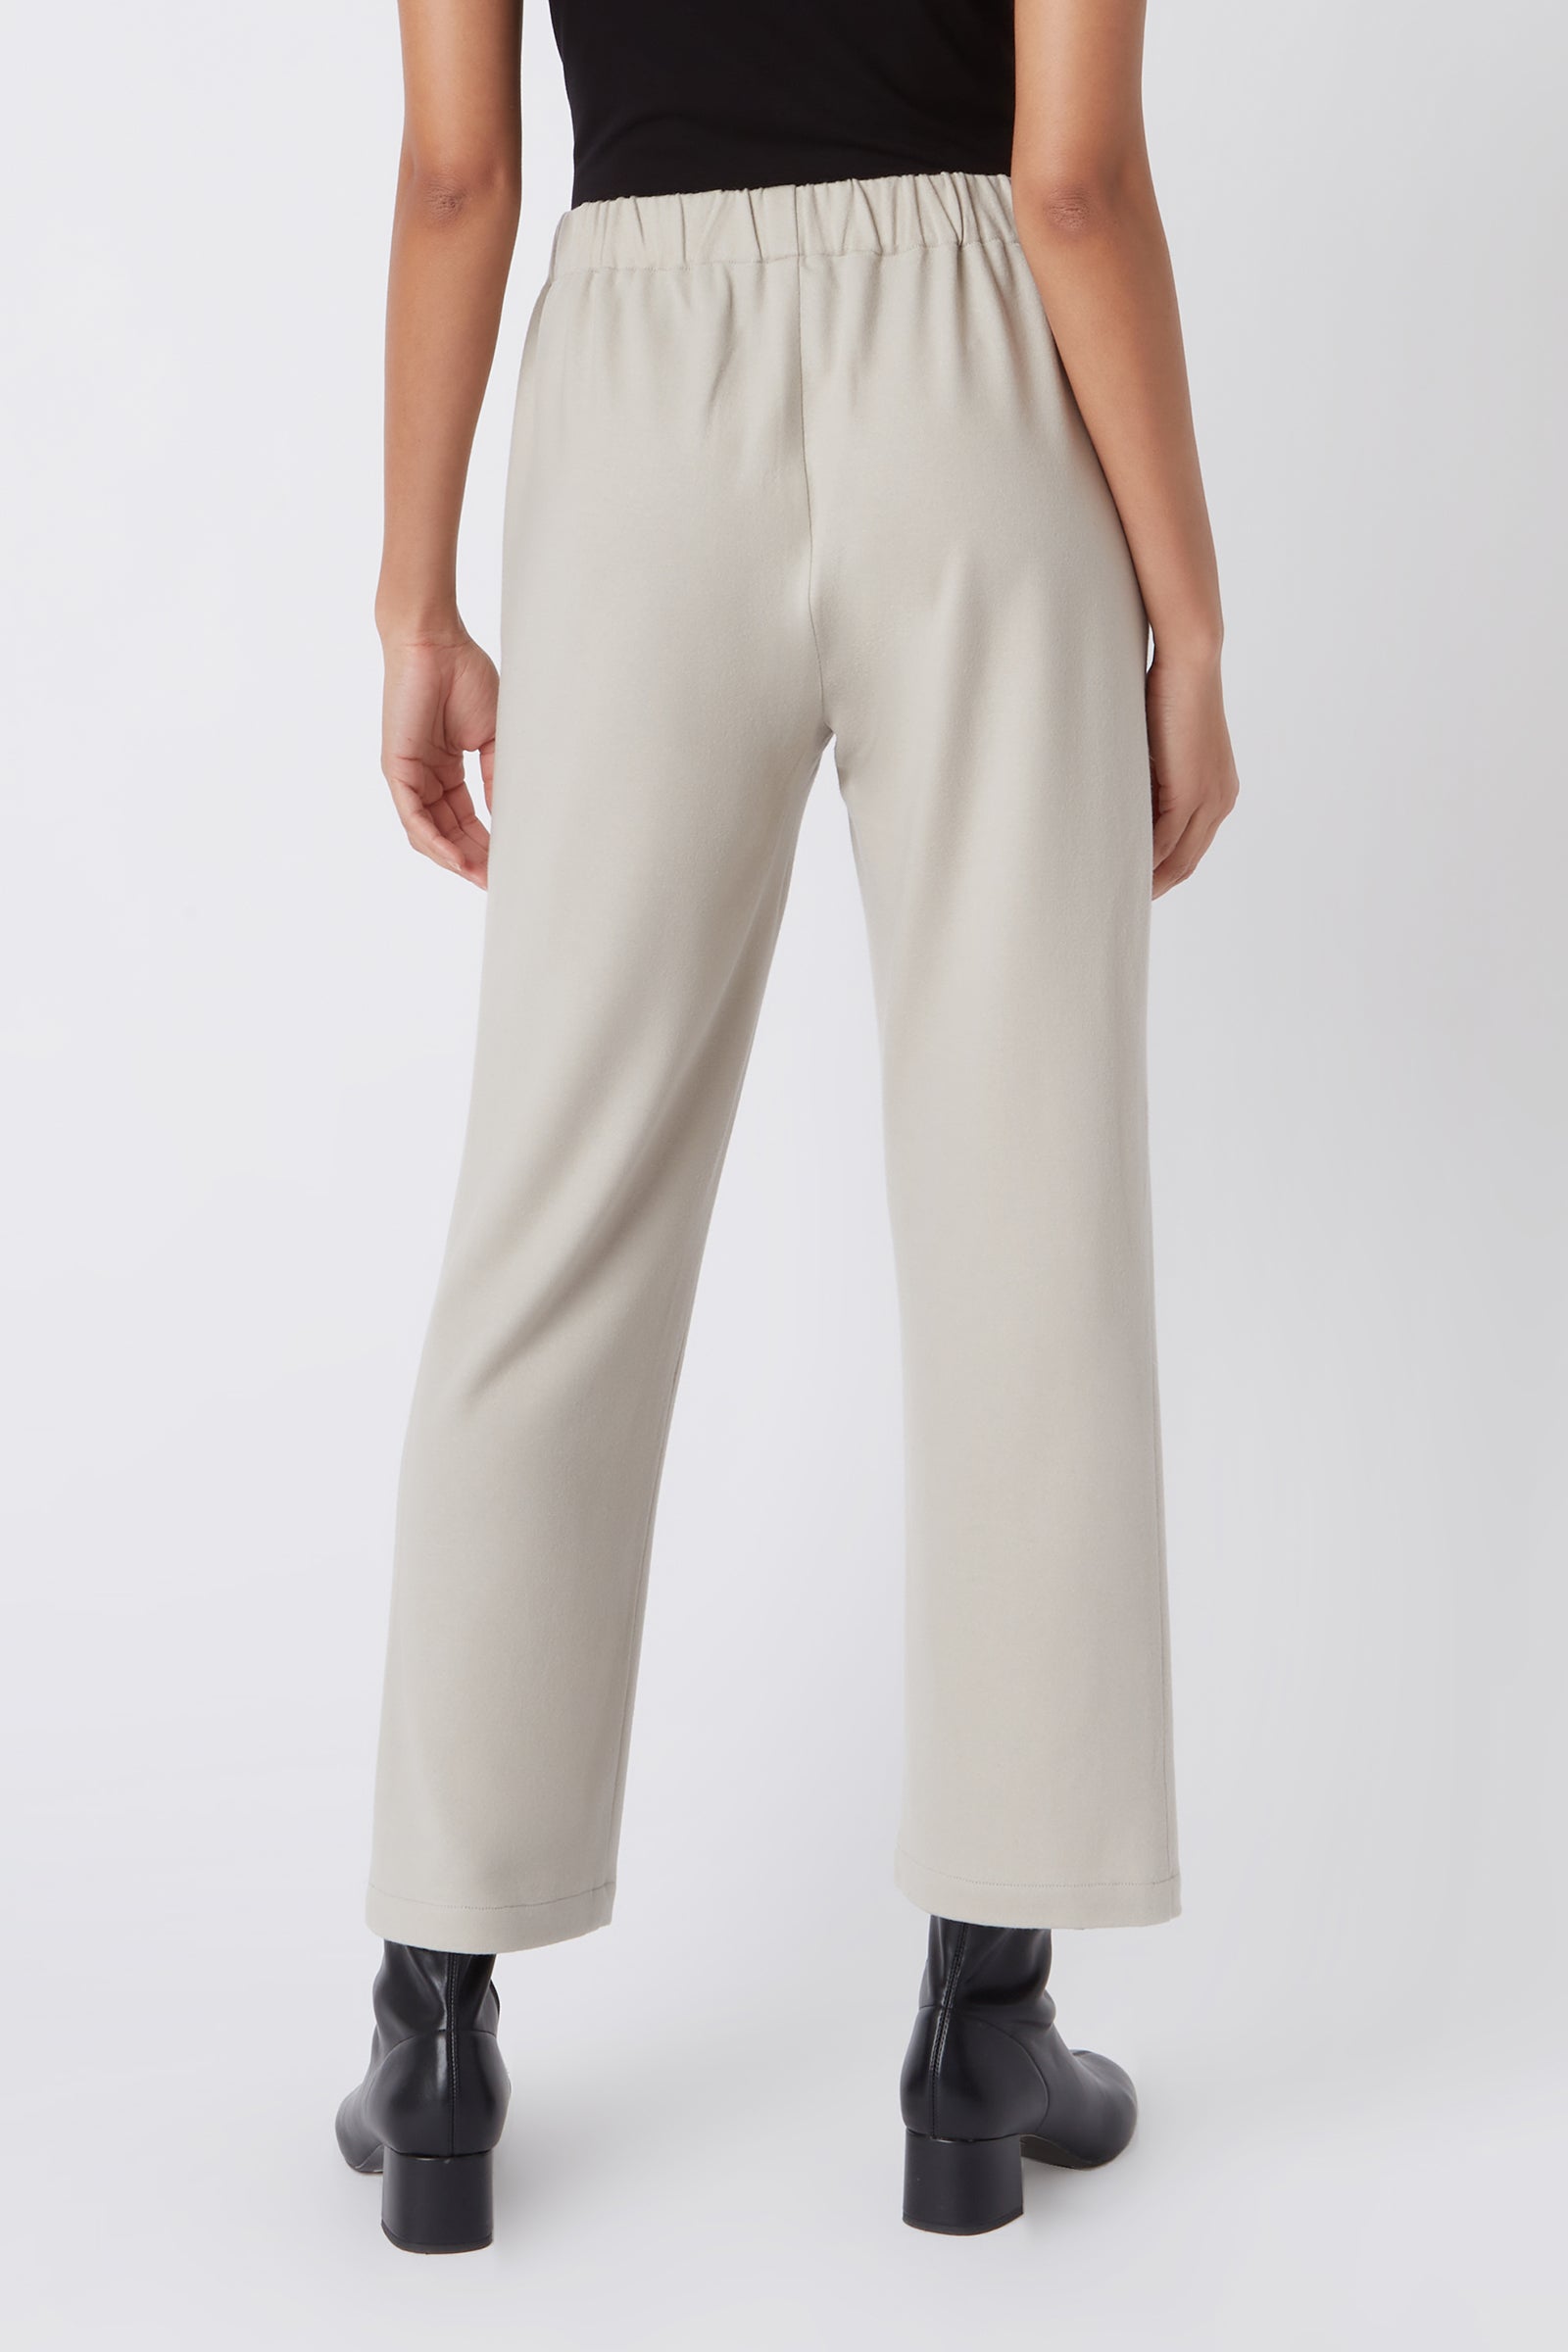 Kal Rieman Felted Jersey Angle Seam Crop Pant in Mink on Model Back Detail View